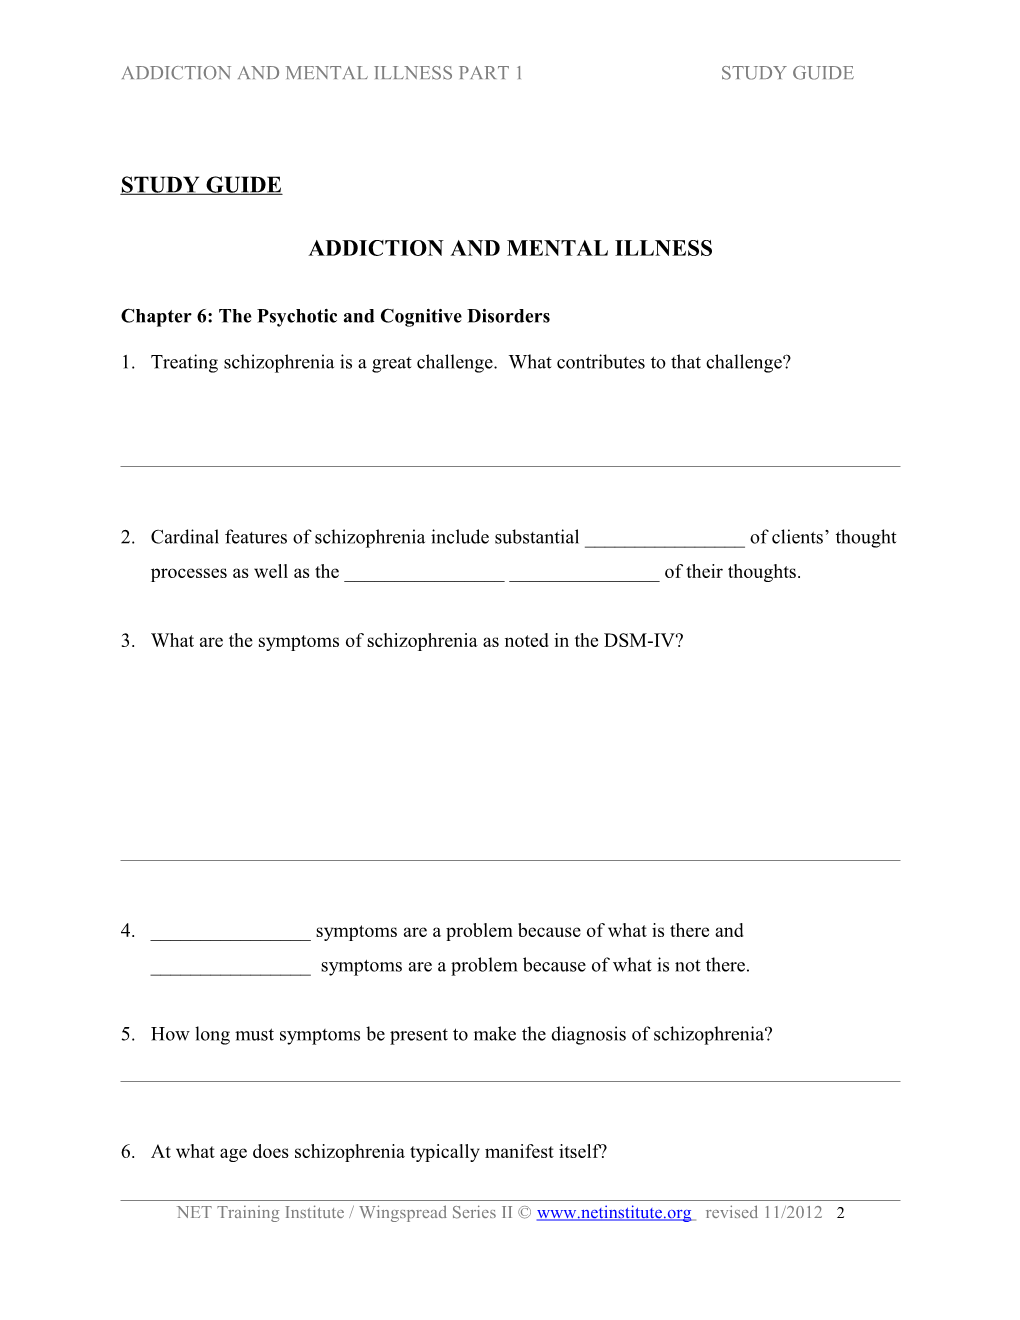 Addiction and Mental Illness Part 1 Study Guide s1